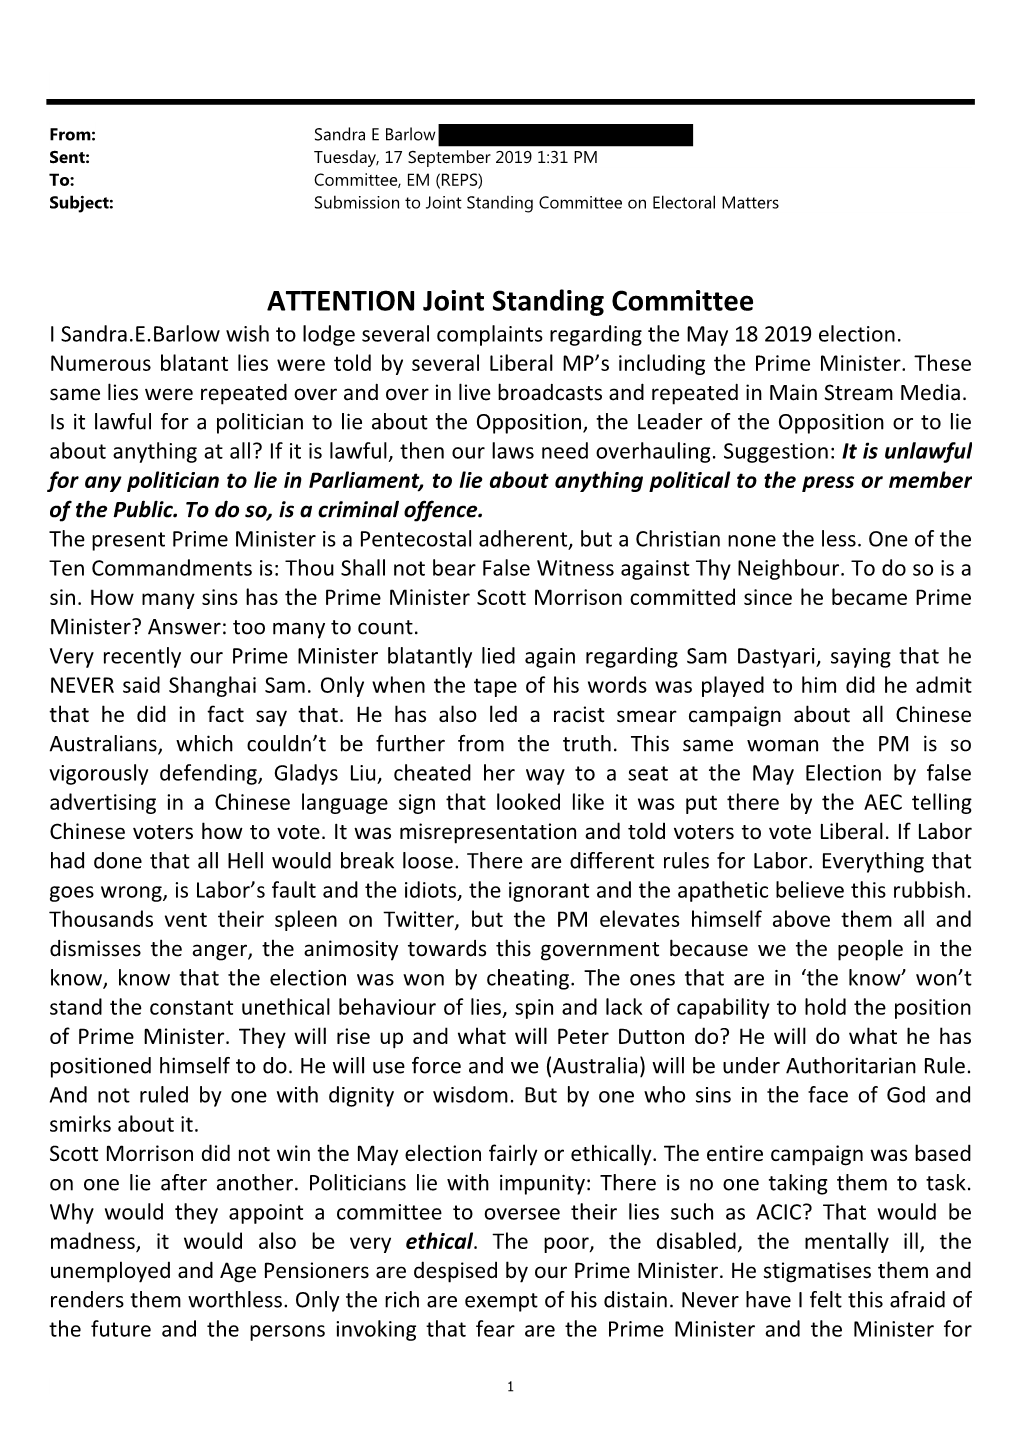 ATTENTION Joint Standing Committee I Sandra.E.Barlow Wish to Lodge Several Complaints Regarding the May 18 2019 Election